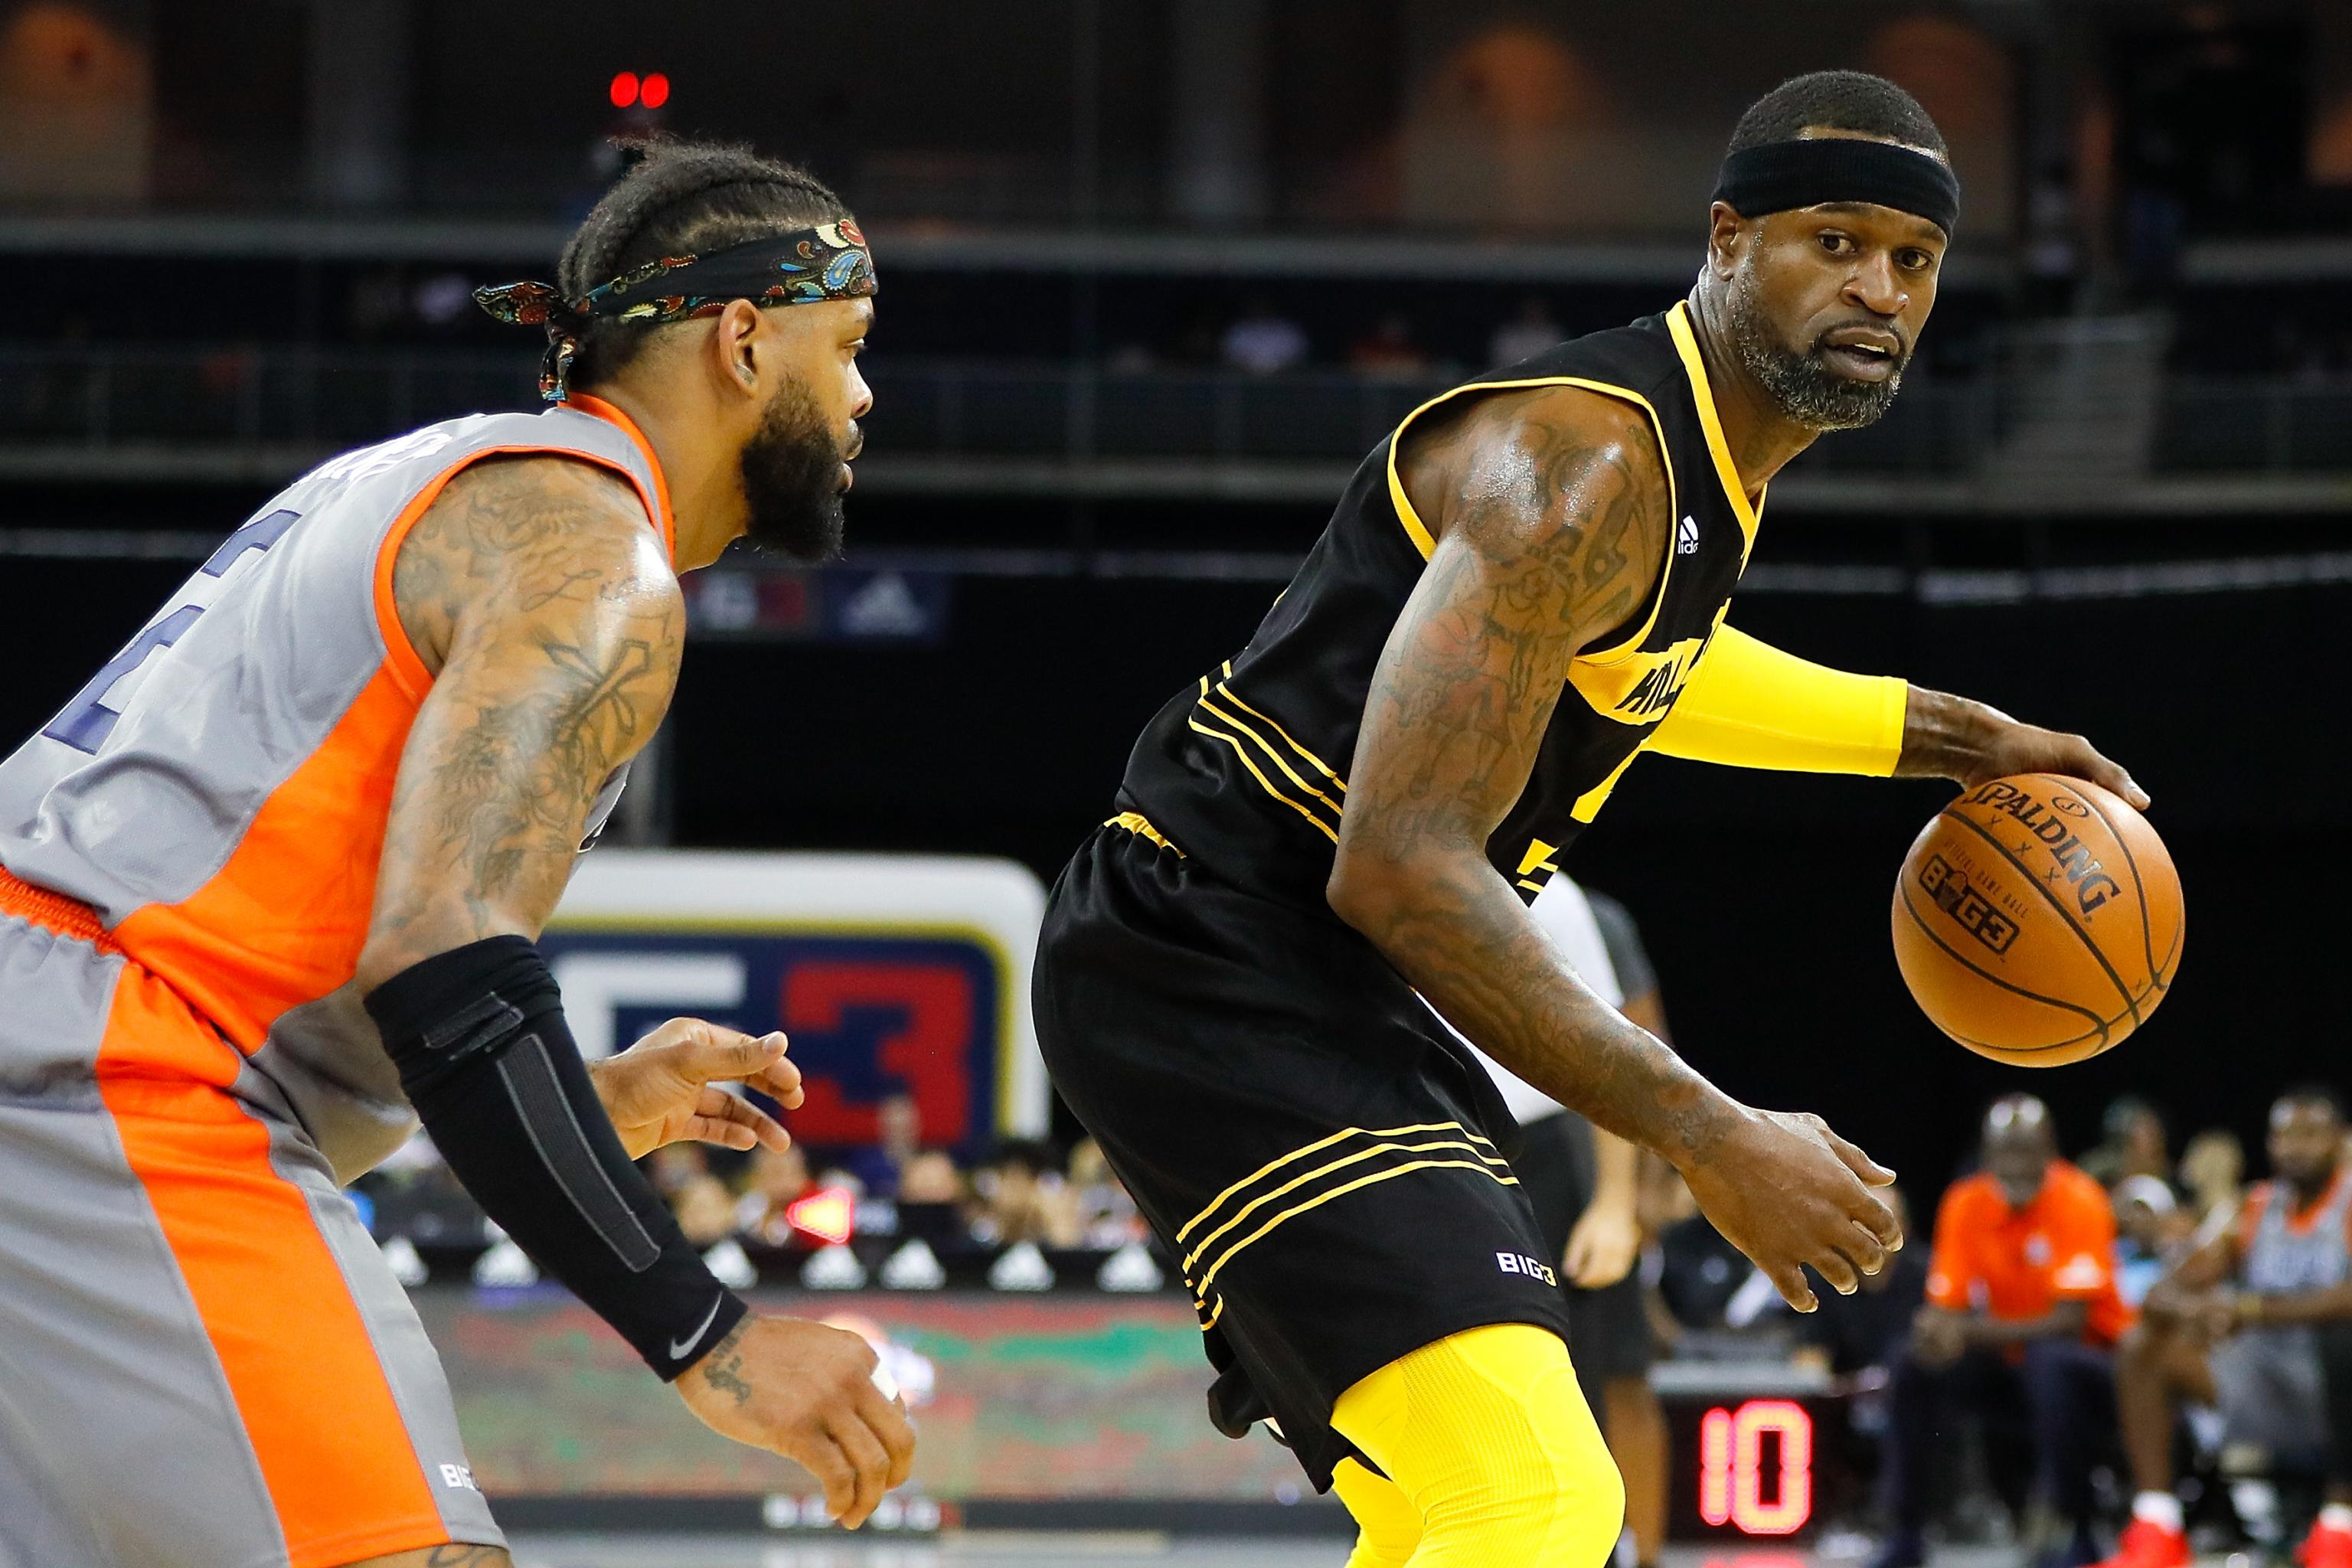 Chris Andersen Pulls Up To Power's Big3 Practice And DOMINATES In